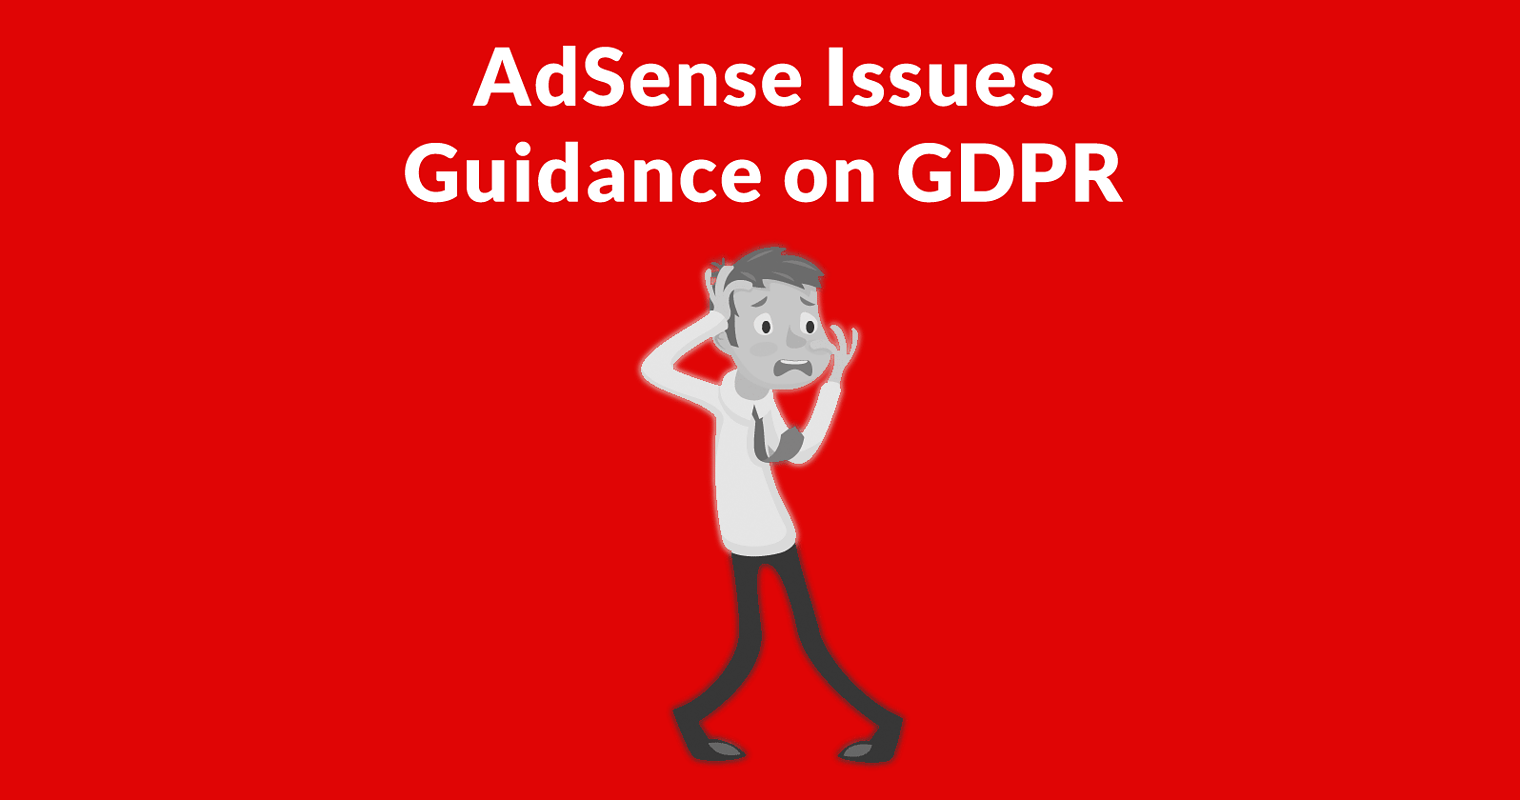 AdSense Issues GDPR Recommendations for Publishers